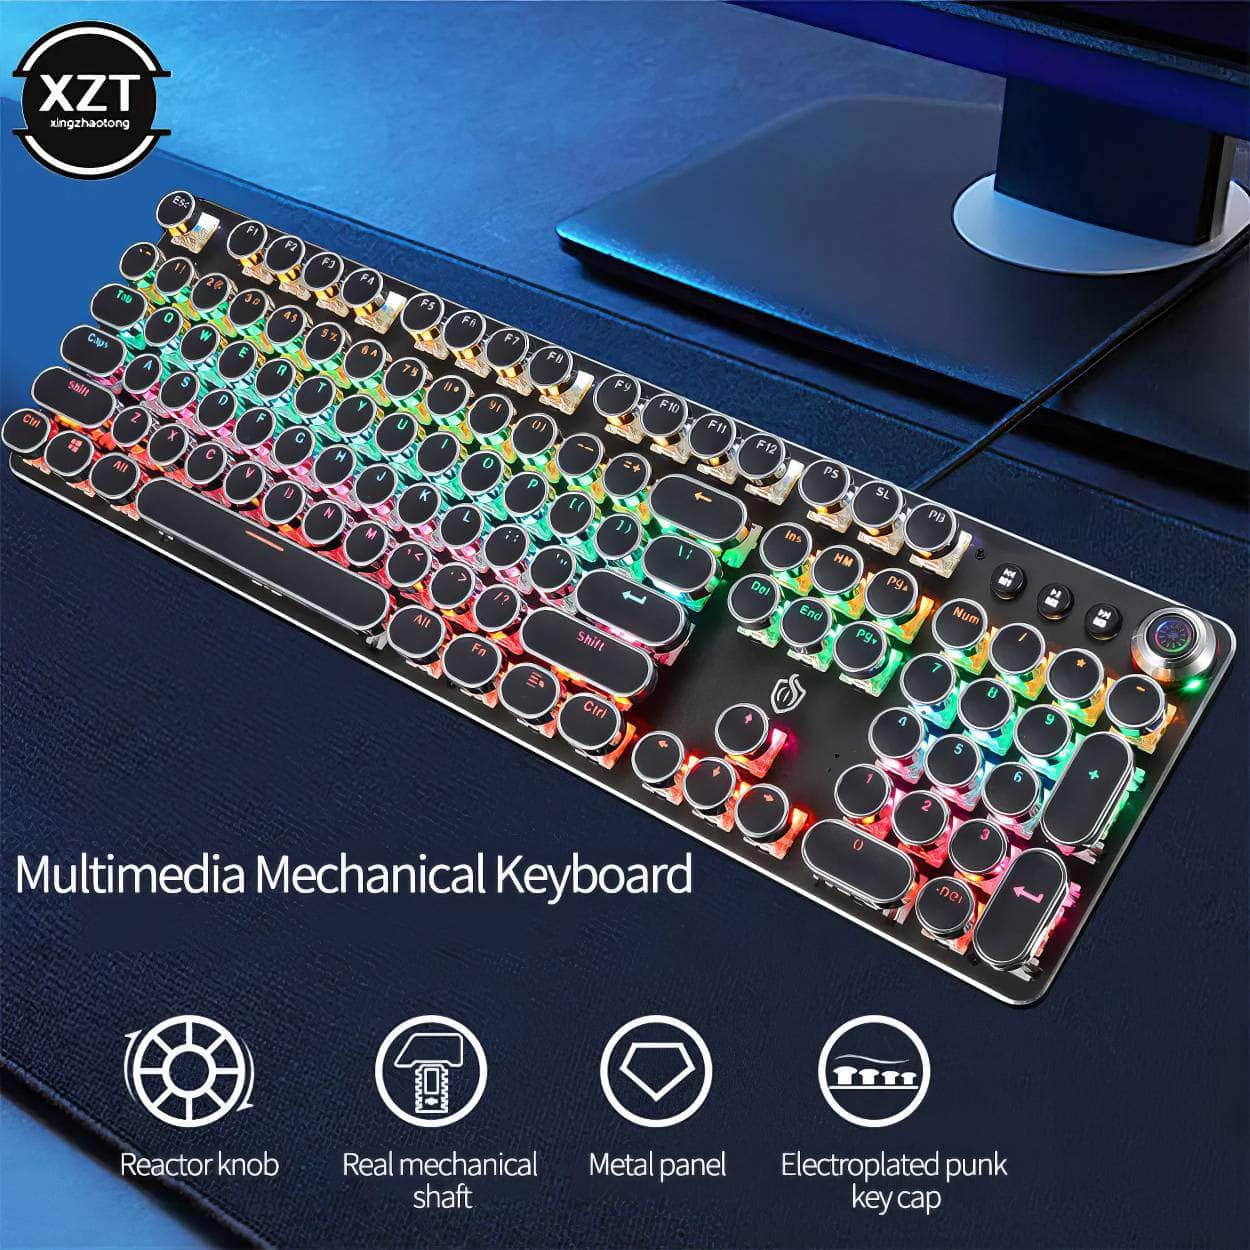 Retro Punk Gaming Mechanical Keyboard - USB Wired, LED, 23 RGB Backlit Modes, Green Axis, 104 Keys, Full Keypad for Computer Game